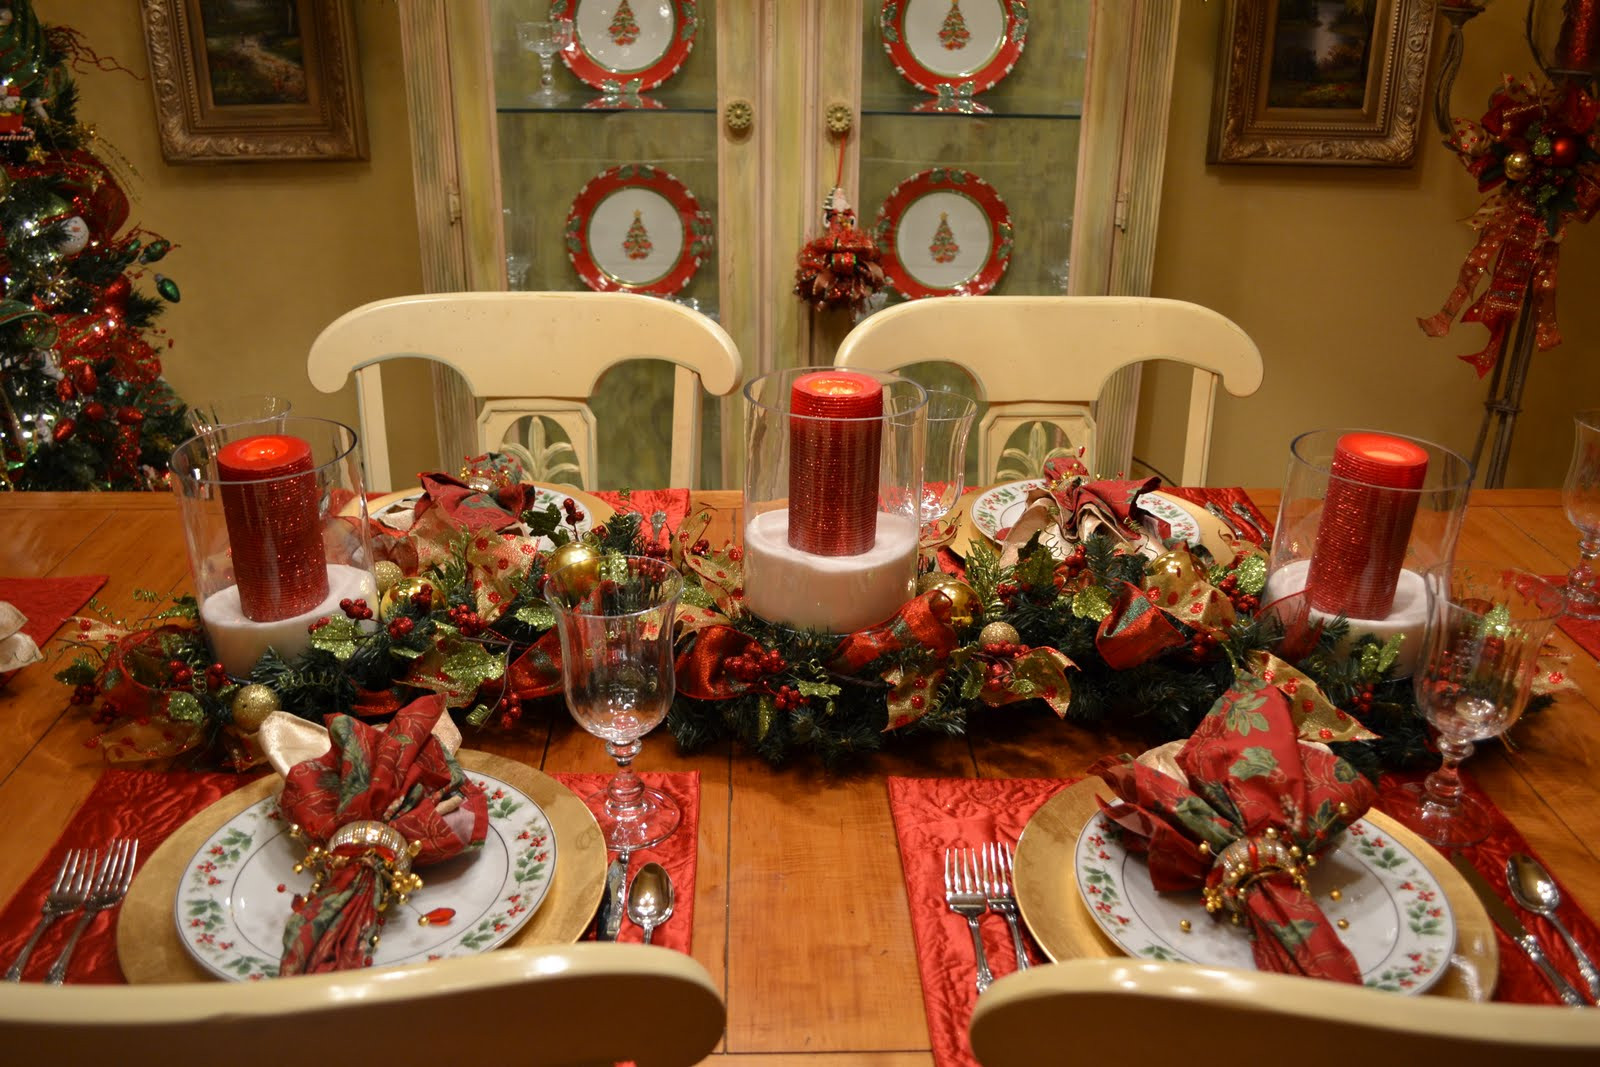 Christmas Dining Room Table Decorations
 Kristen s Creations My Christmas Dining Room